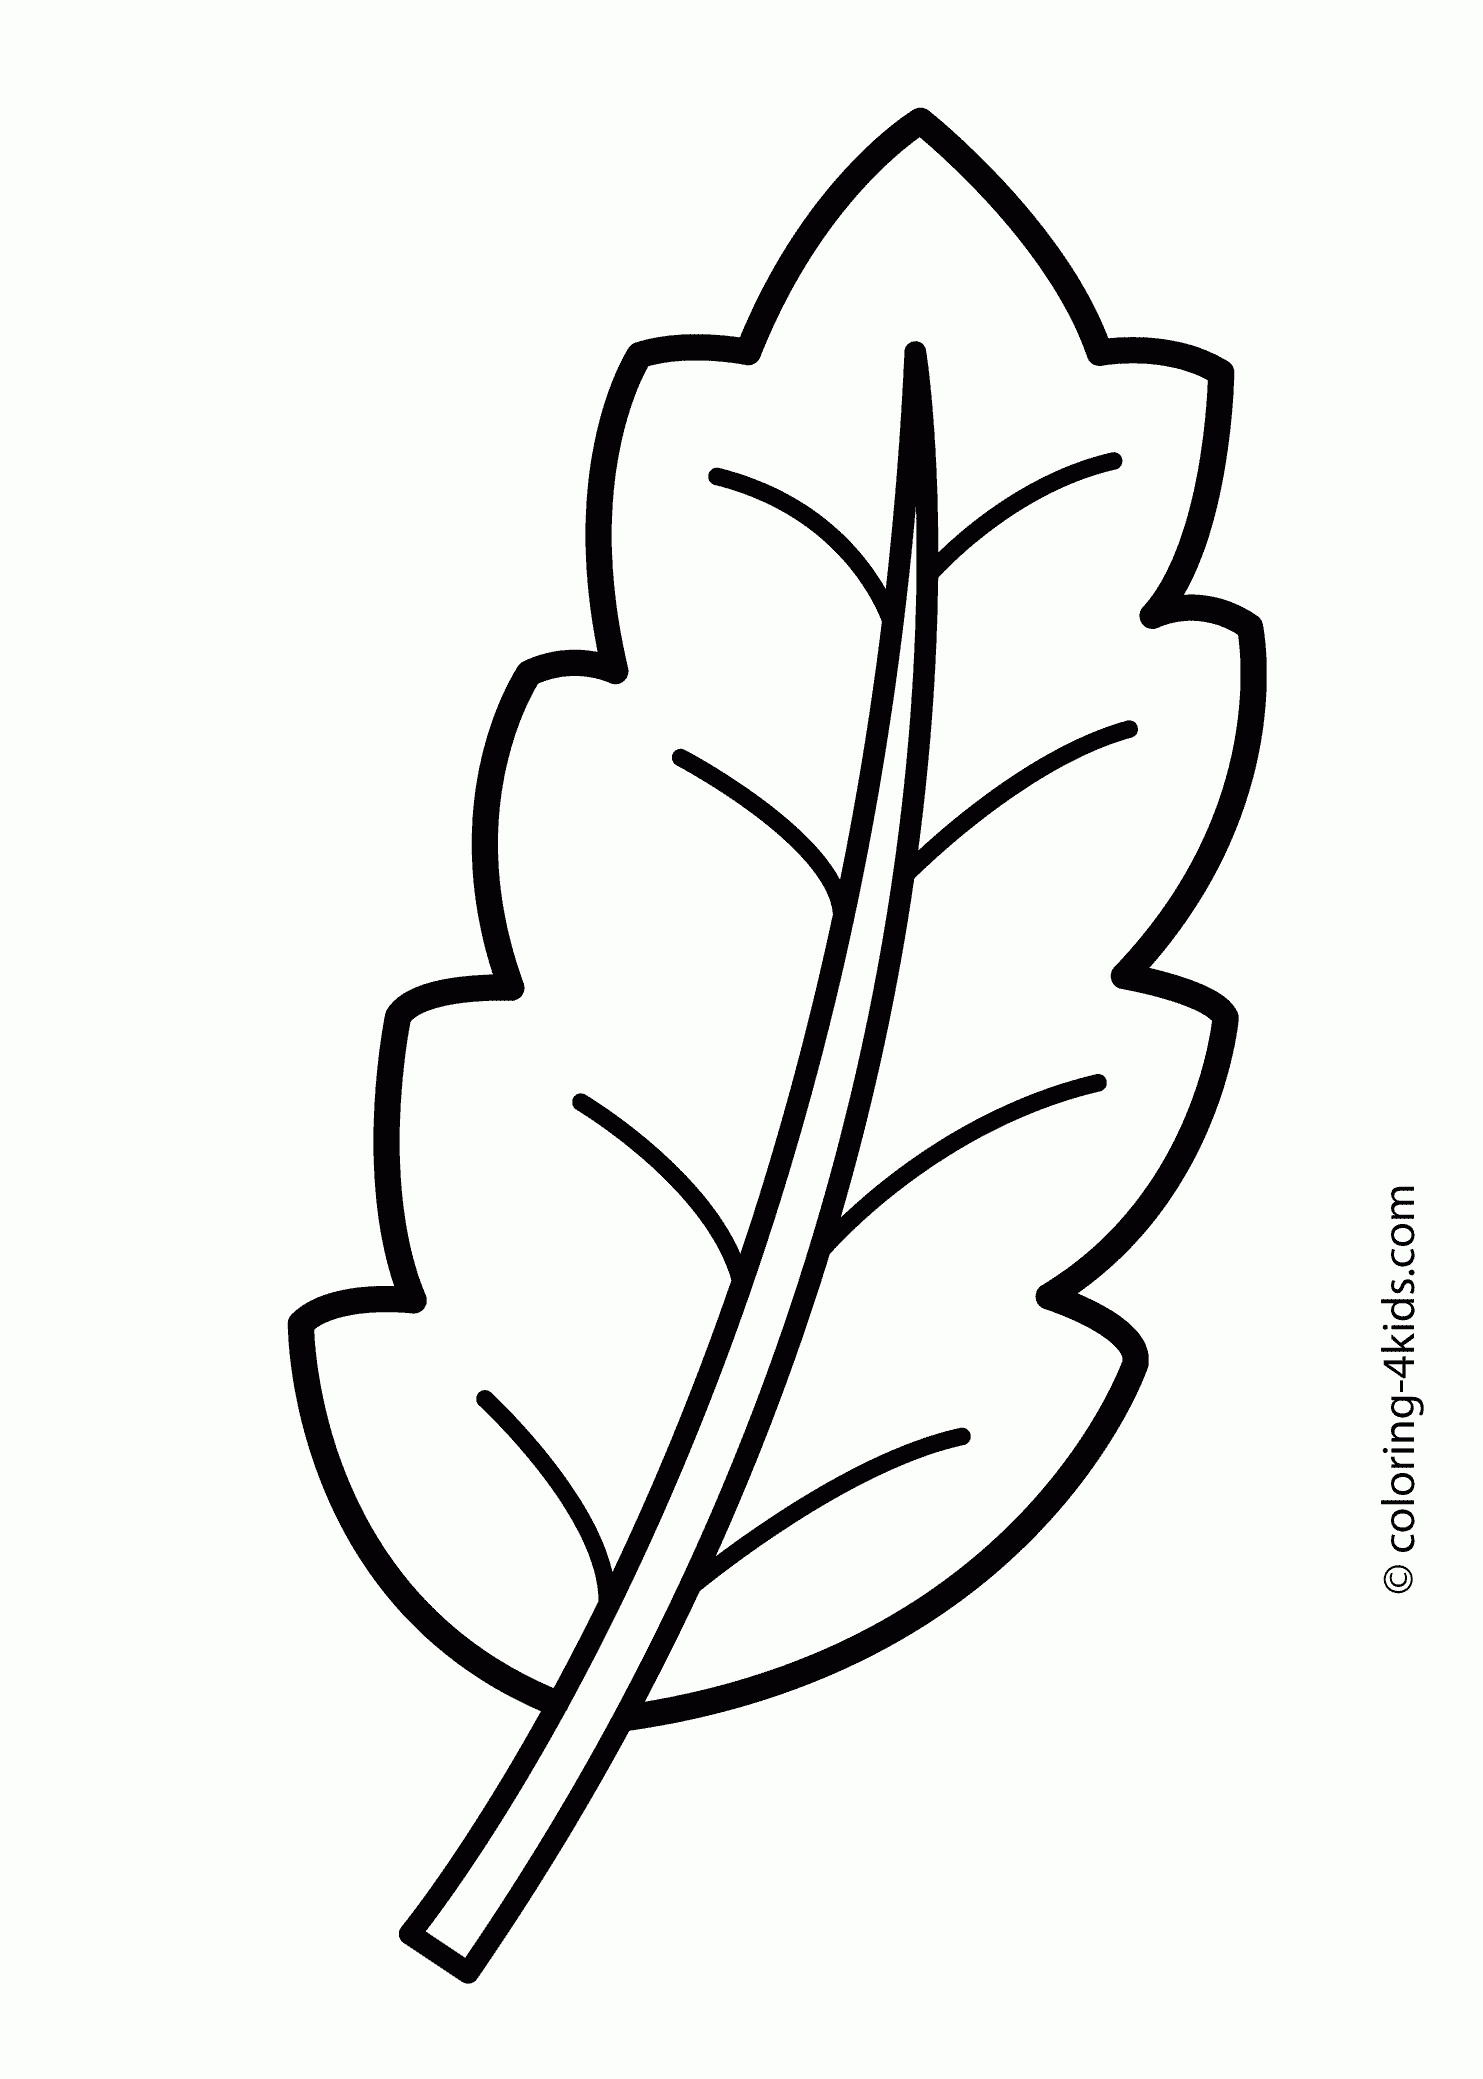 Free Palm Branch Coloring Page, Download Free Palm Branch Coloring Page